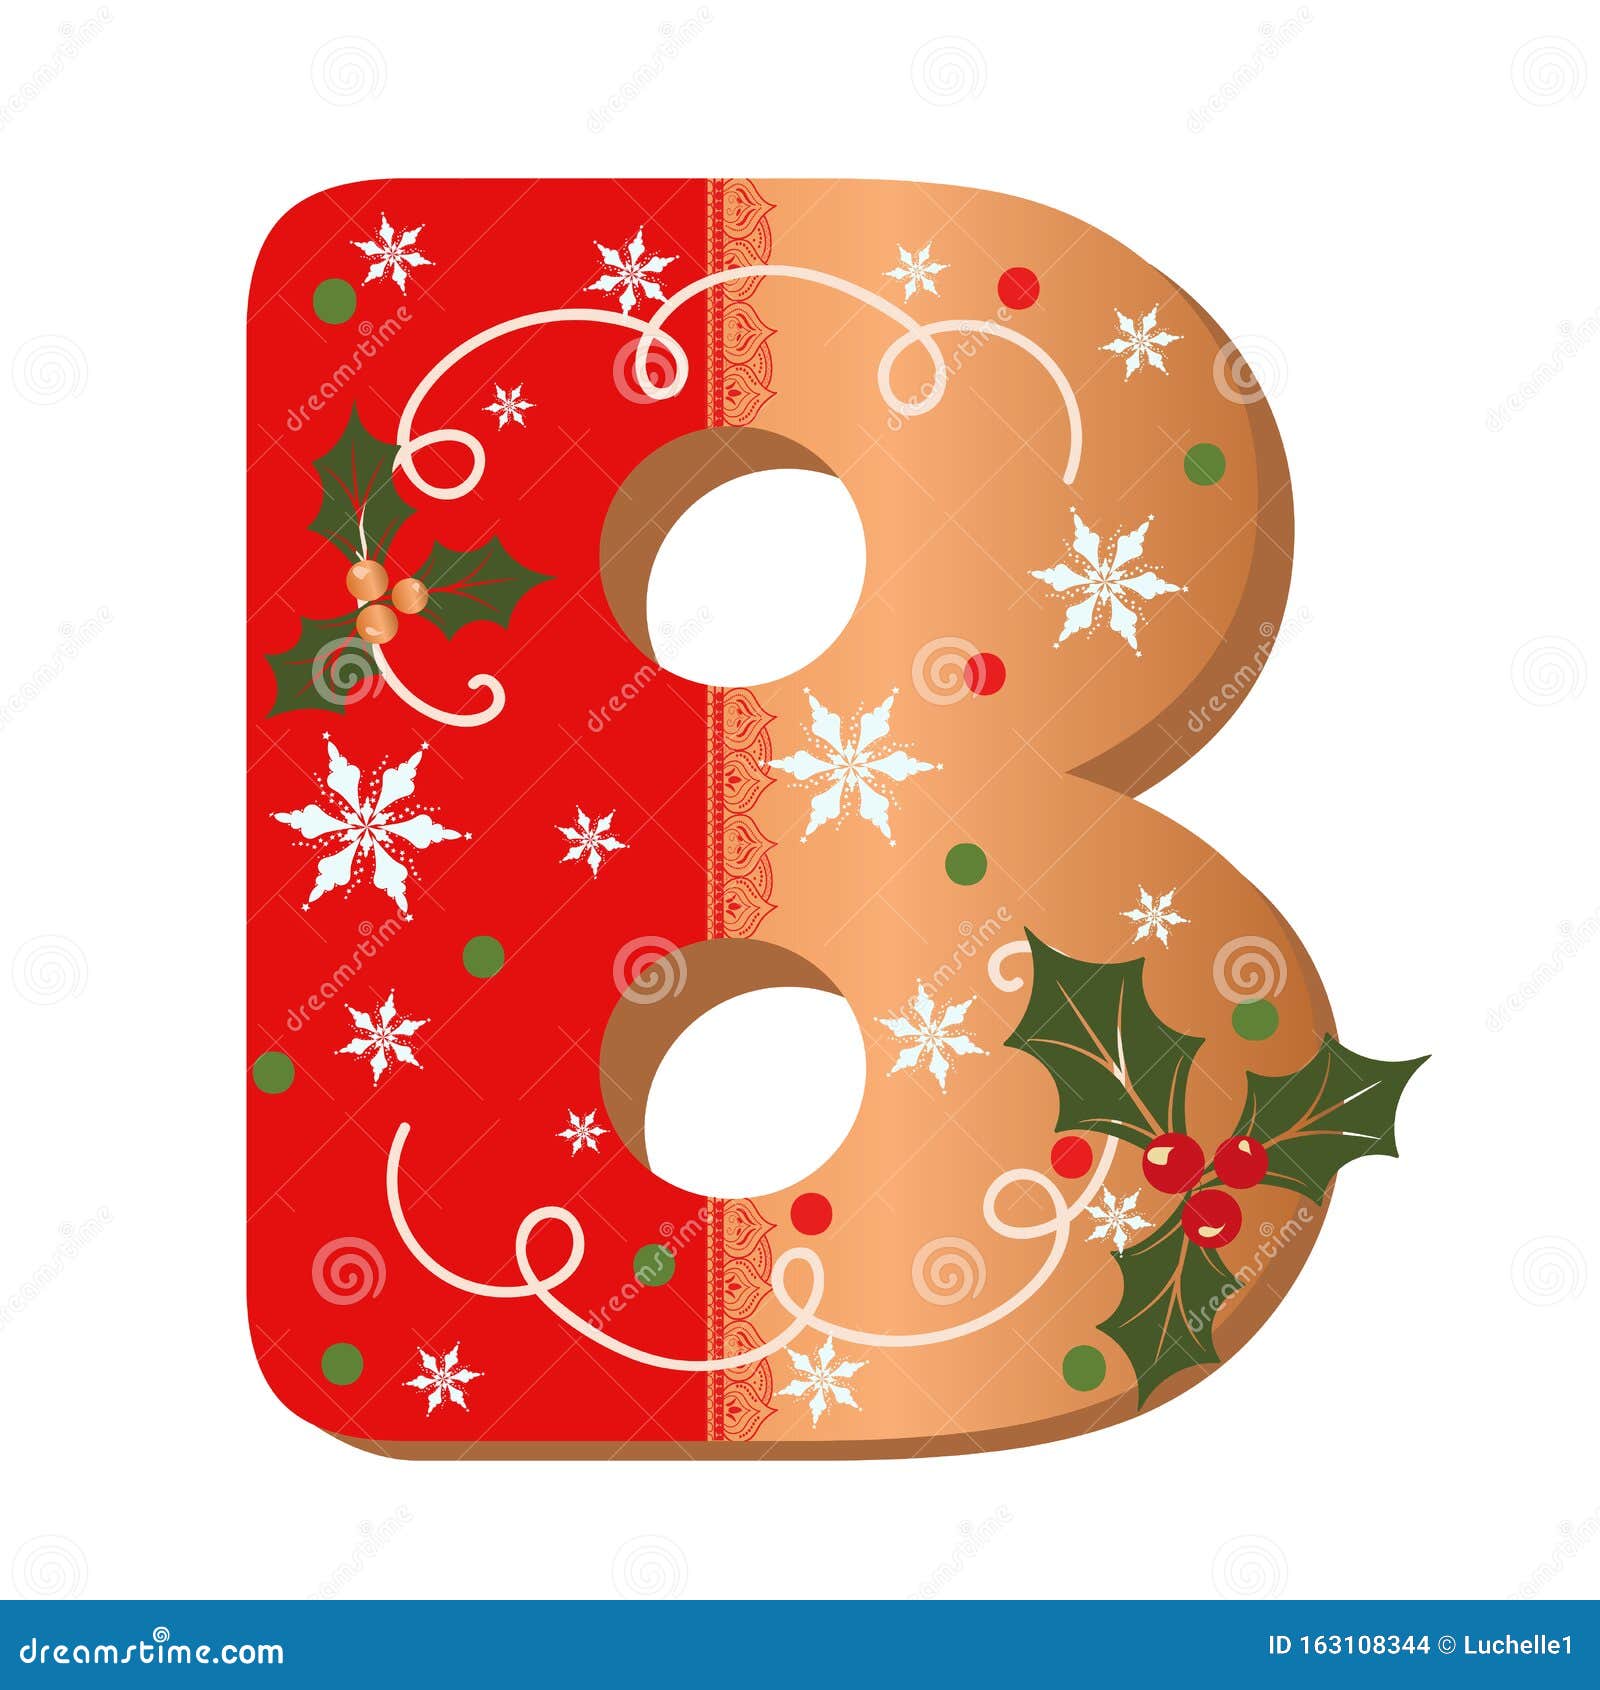 https://thumbs.dreamstime.com/z/letter-b-cookie-alphabet-christmas-flowers-snowflakes-illustration-collection-decoration-invitations-banners-more-163108344.jpg